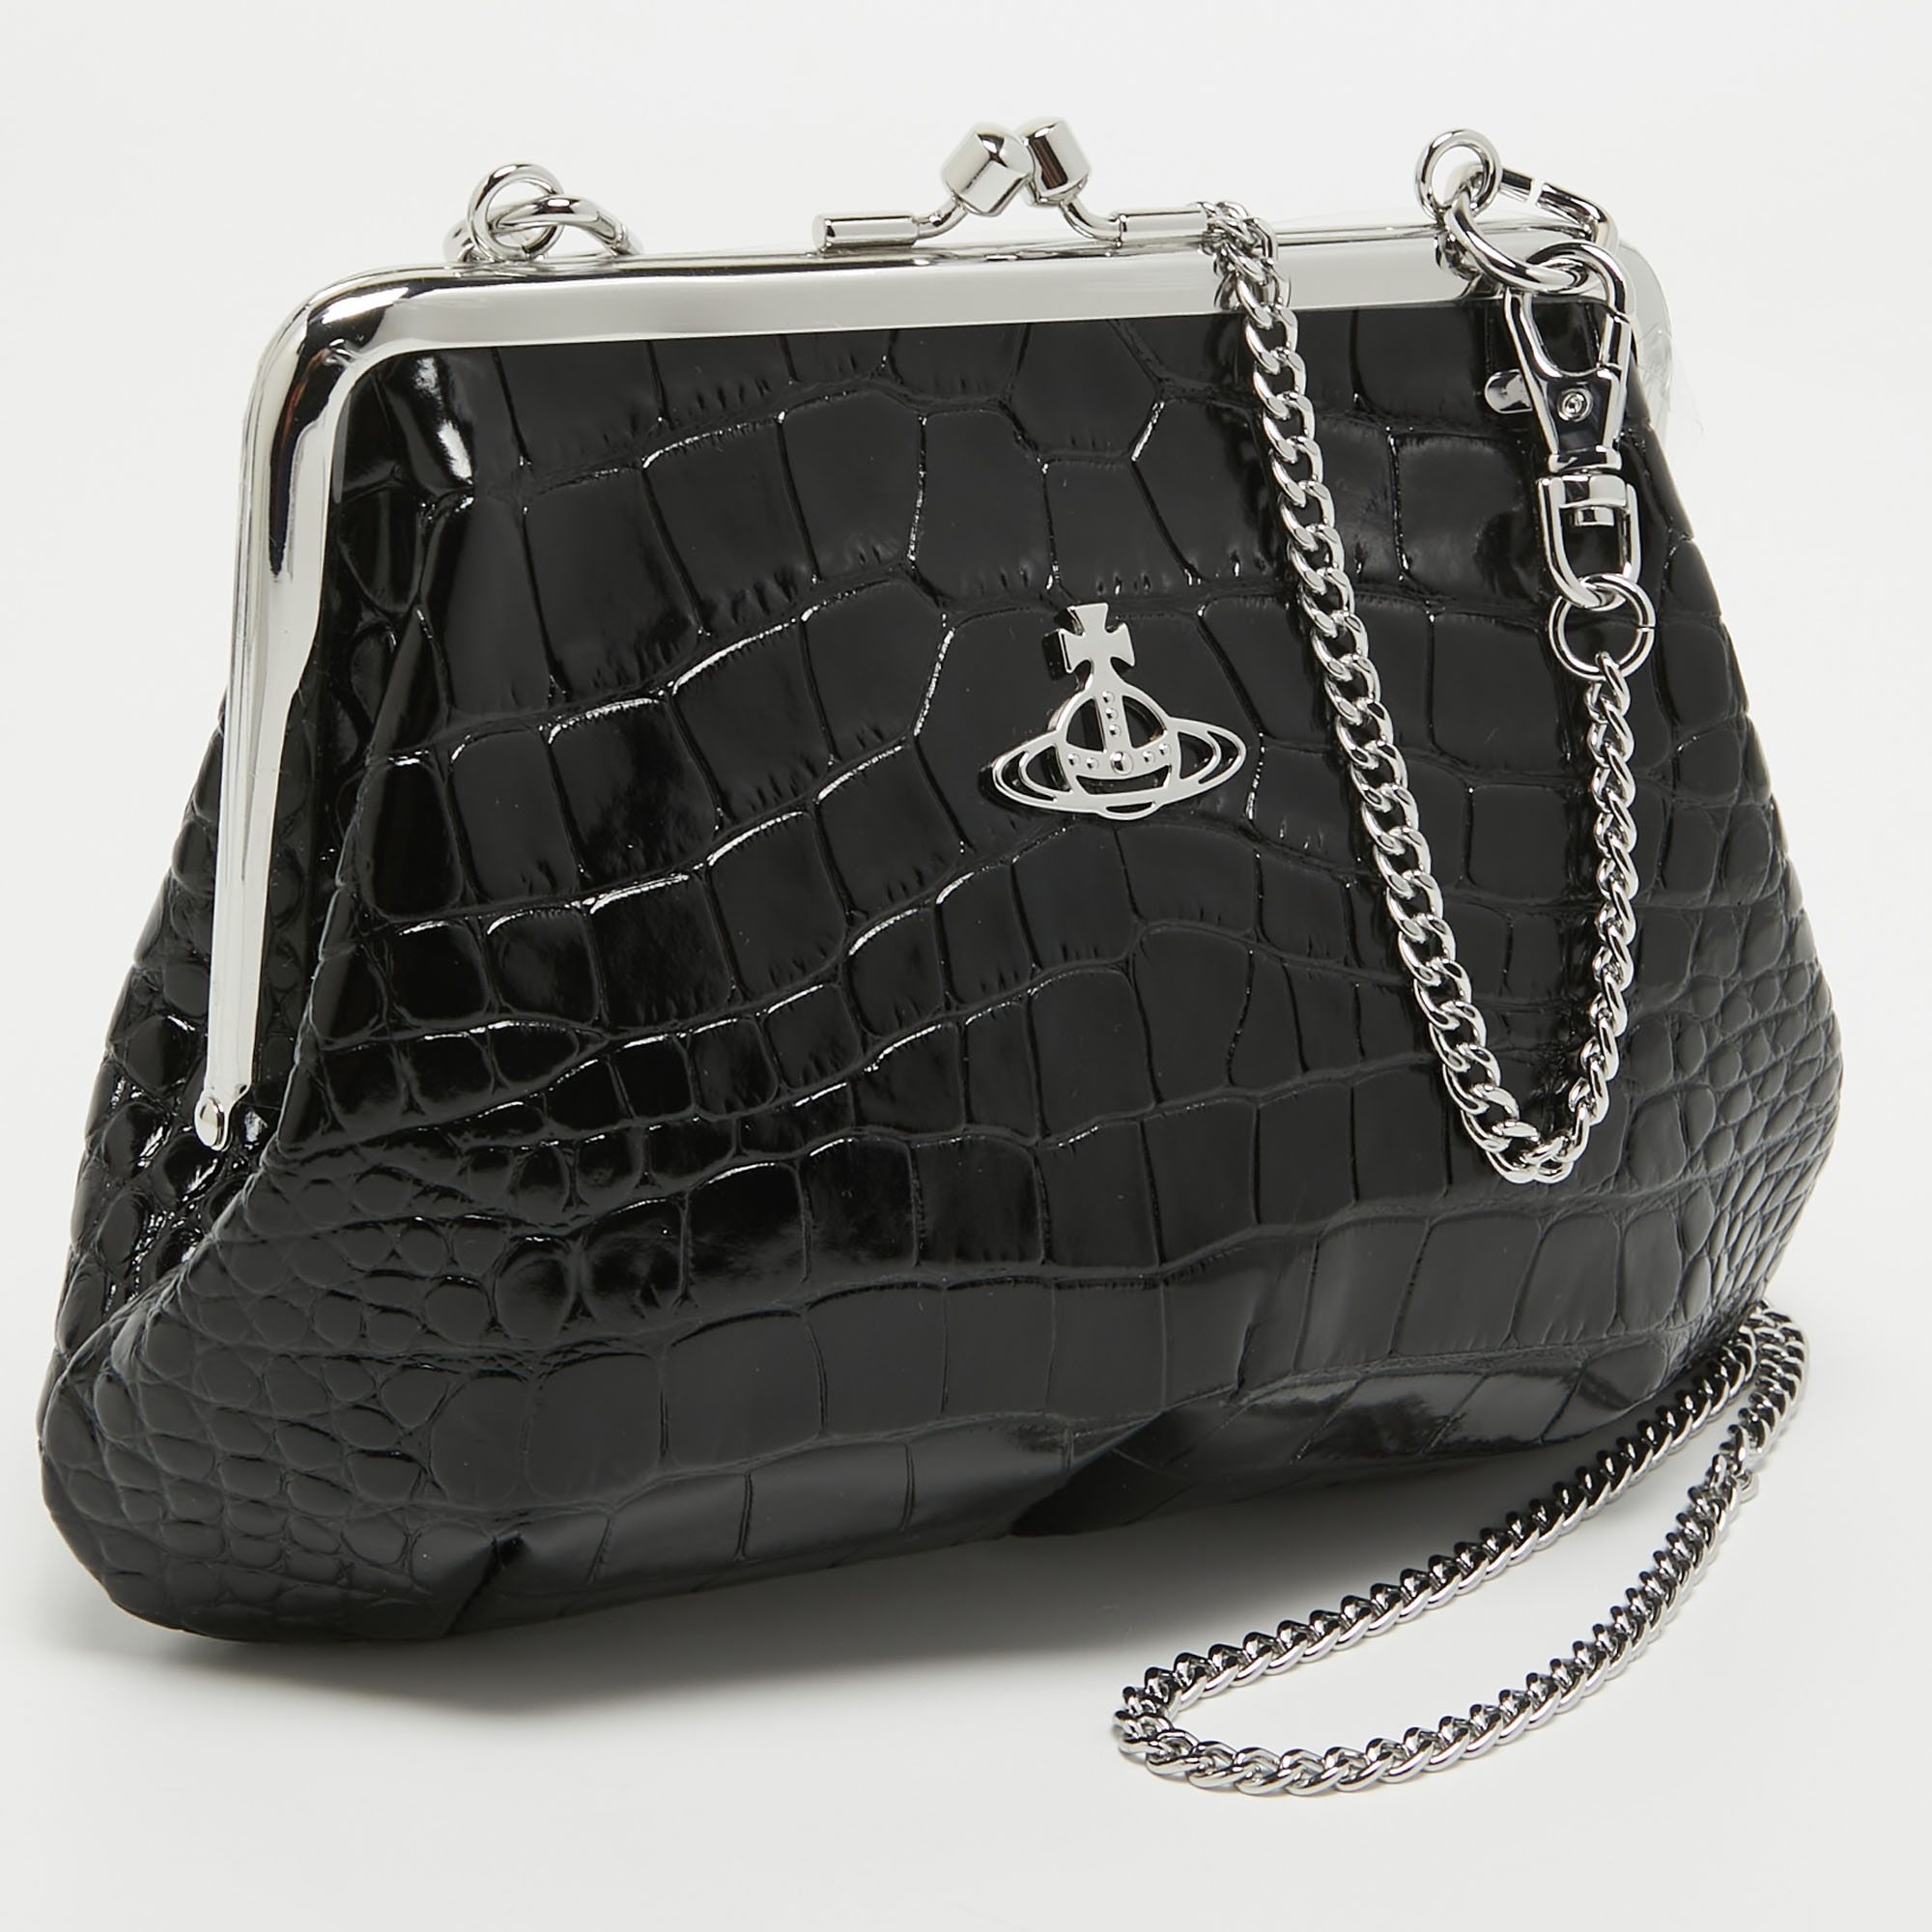 Vivienne Westwood Black Croc Embossed Leather Granny Frame Chain Clutch